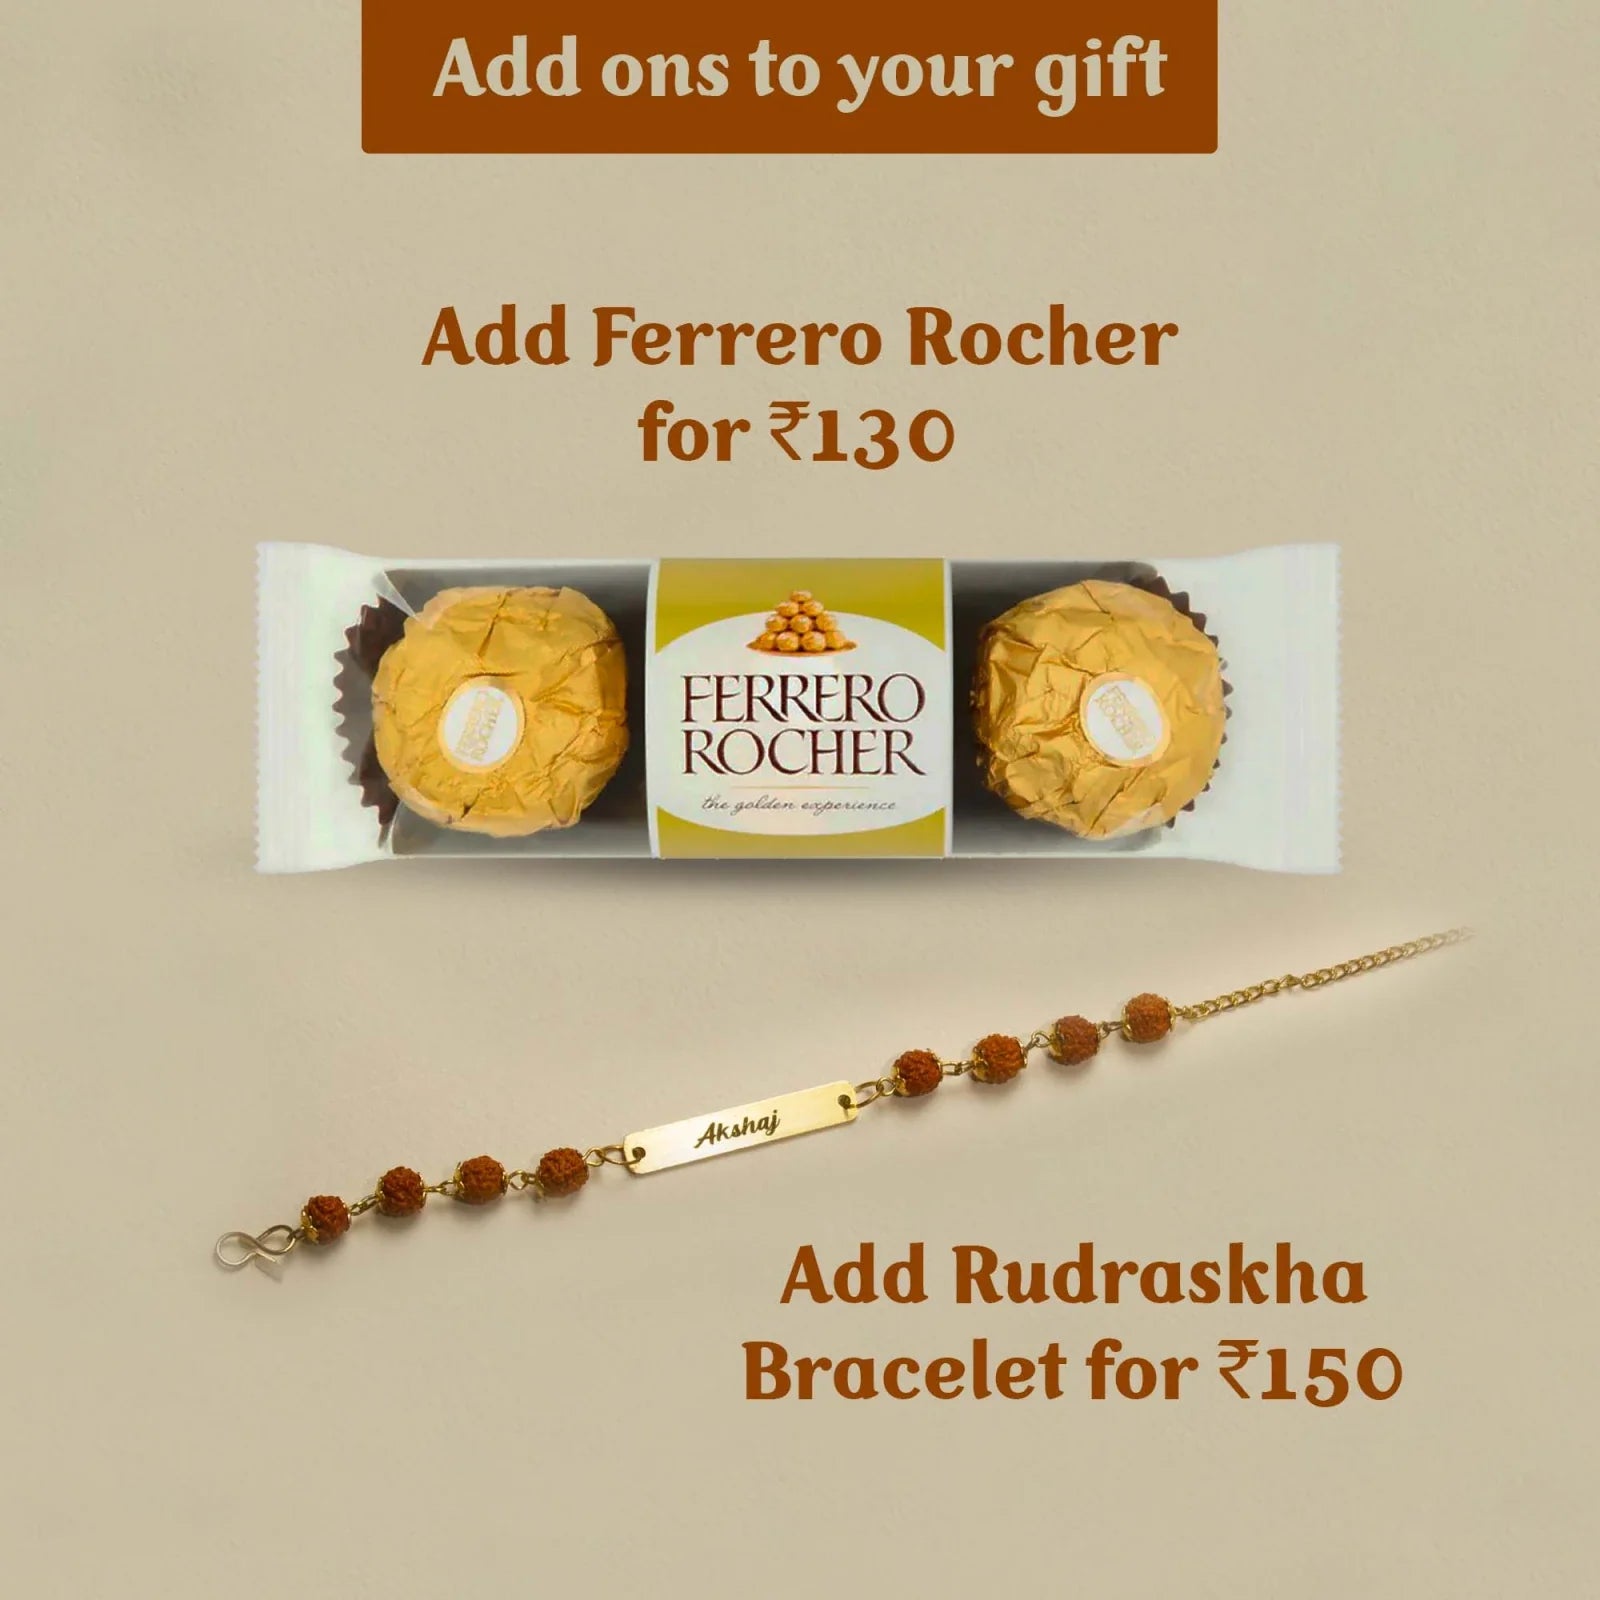 Add a chocolate add-on to your gift and bring sweet memories alive with your friends and family